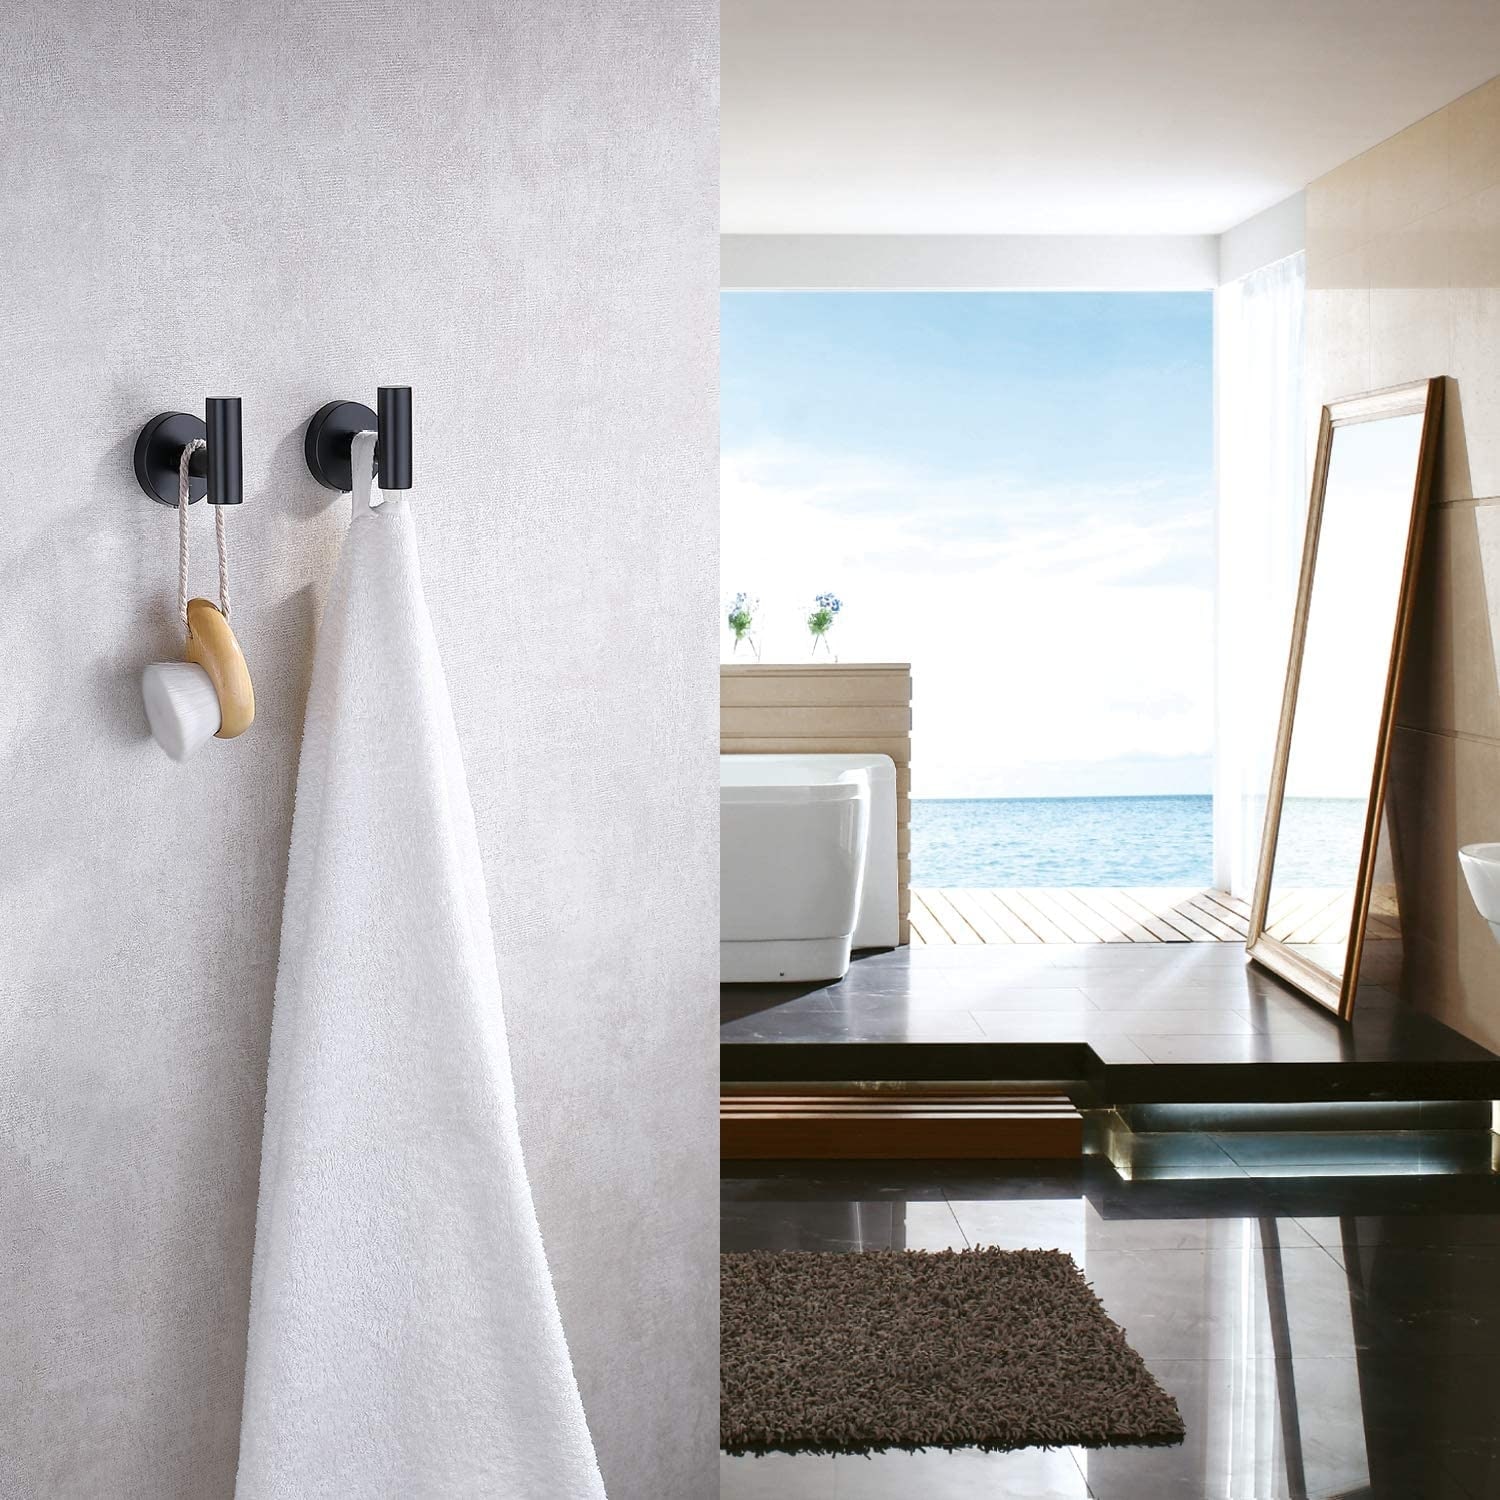 https://ak1.ostkcdn.com/images/products/is/images/direct/178555ceb79a6f6f55c00984f1704044b393a684/Bathroom-Robe-and-Towel-Hook-in-Stainless-Steel.jpg